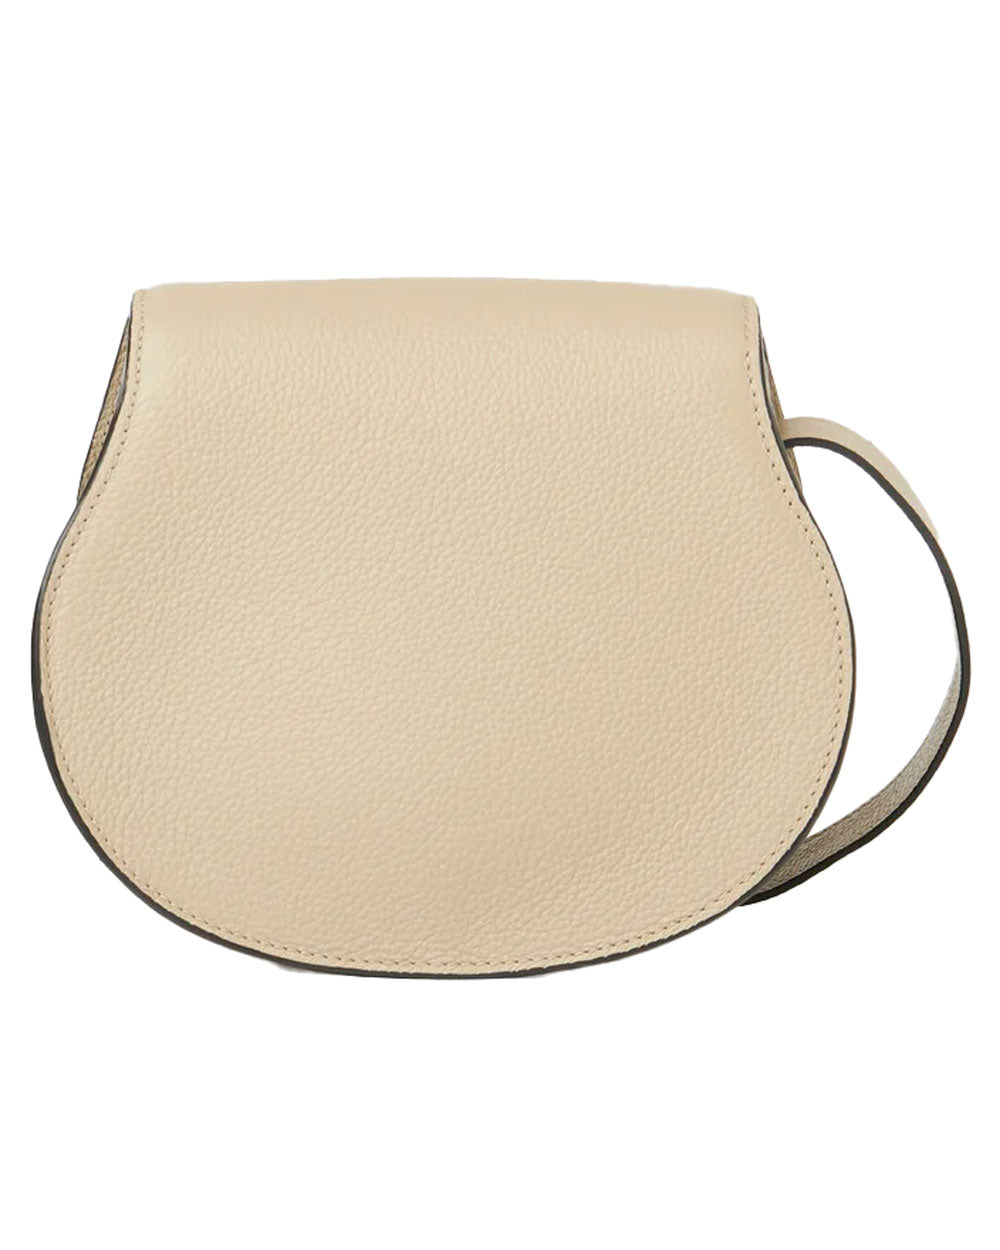 Marcie Small Saddle Bag in Root Beige